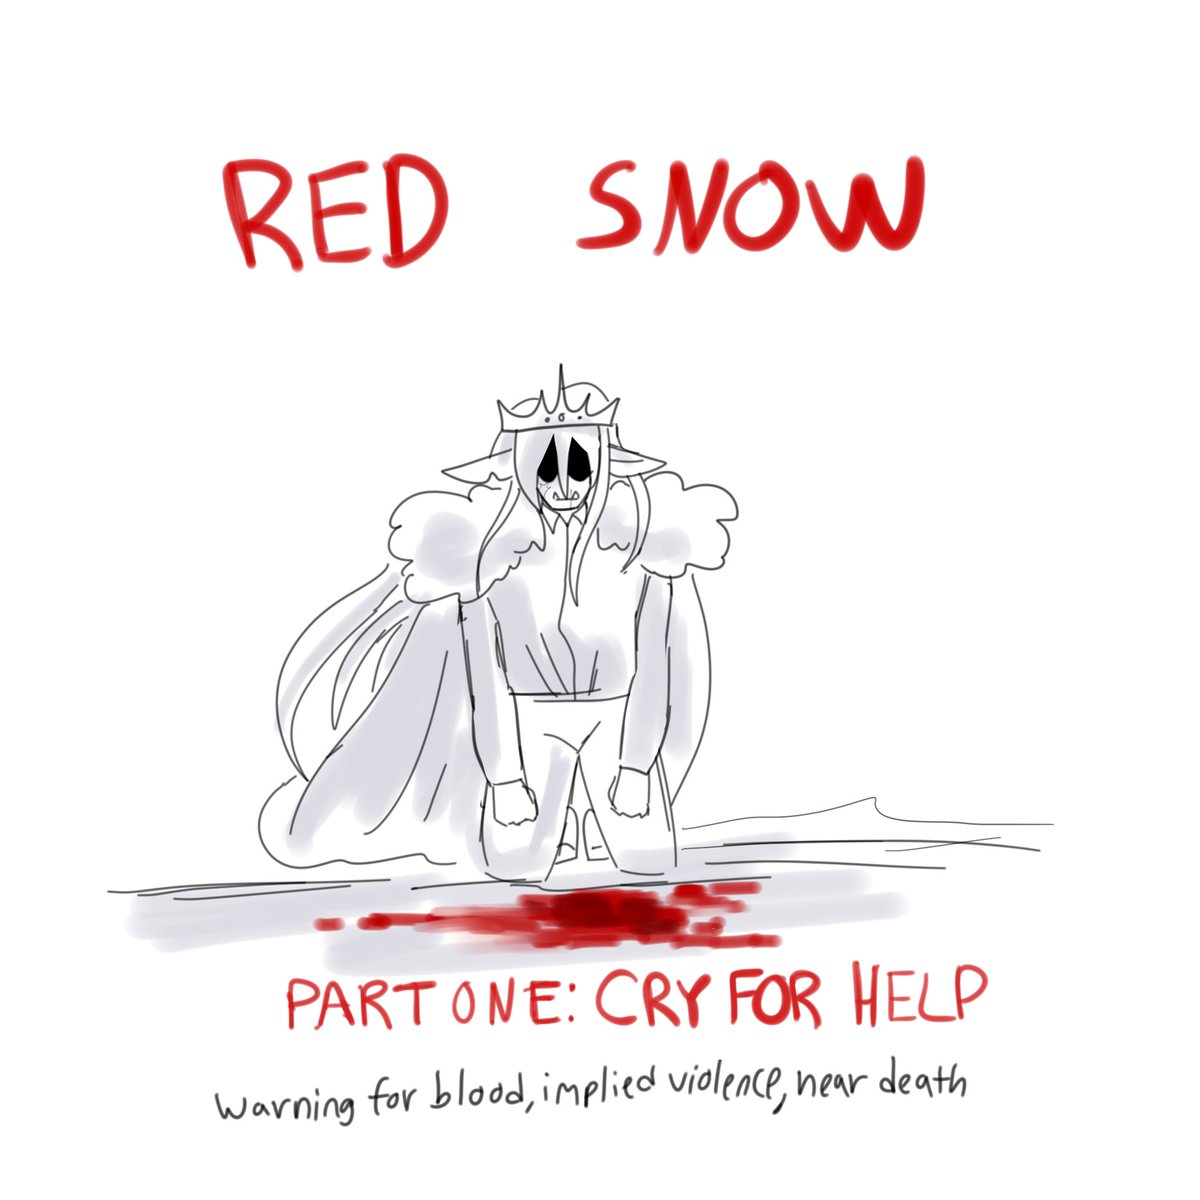 tw blood, implied violence

red snow, part 1: cry for help 
(1/2) 